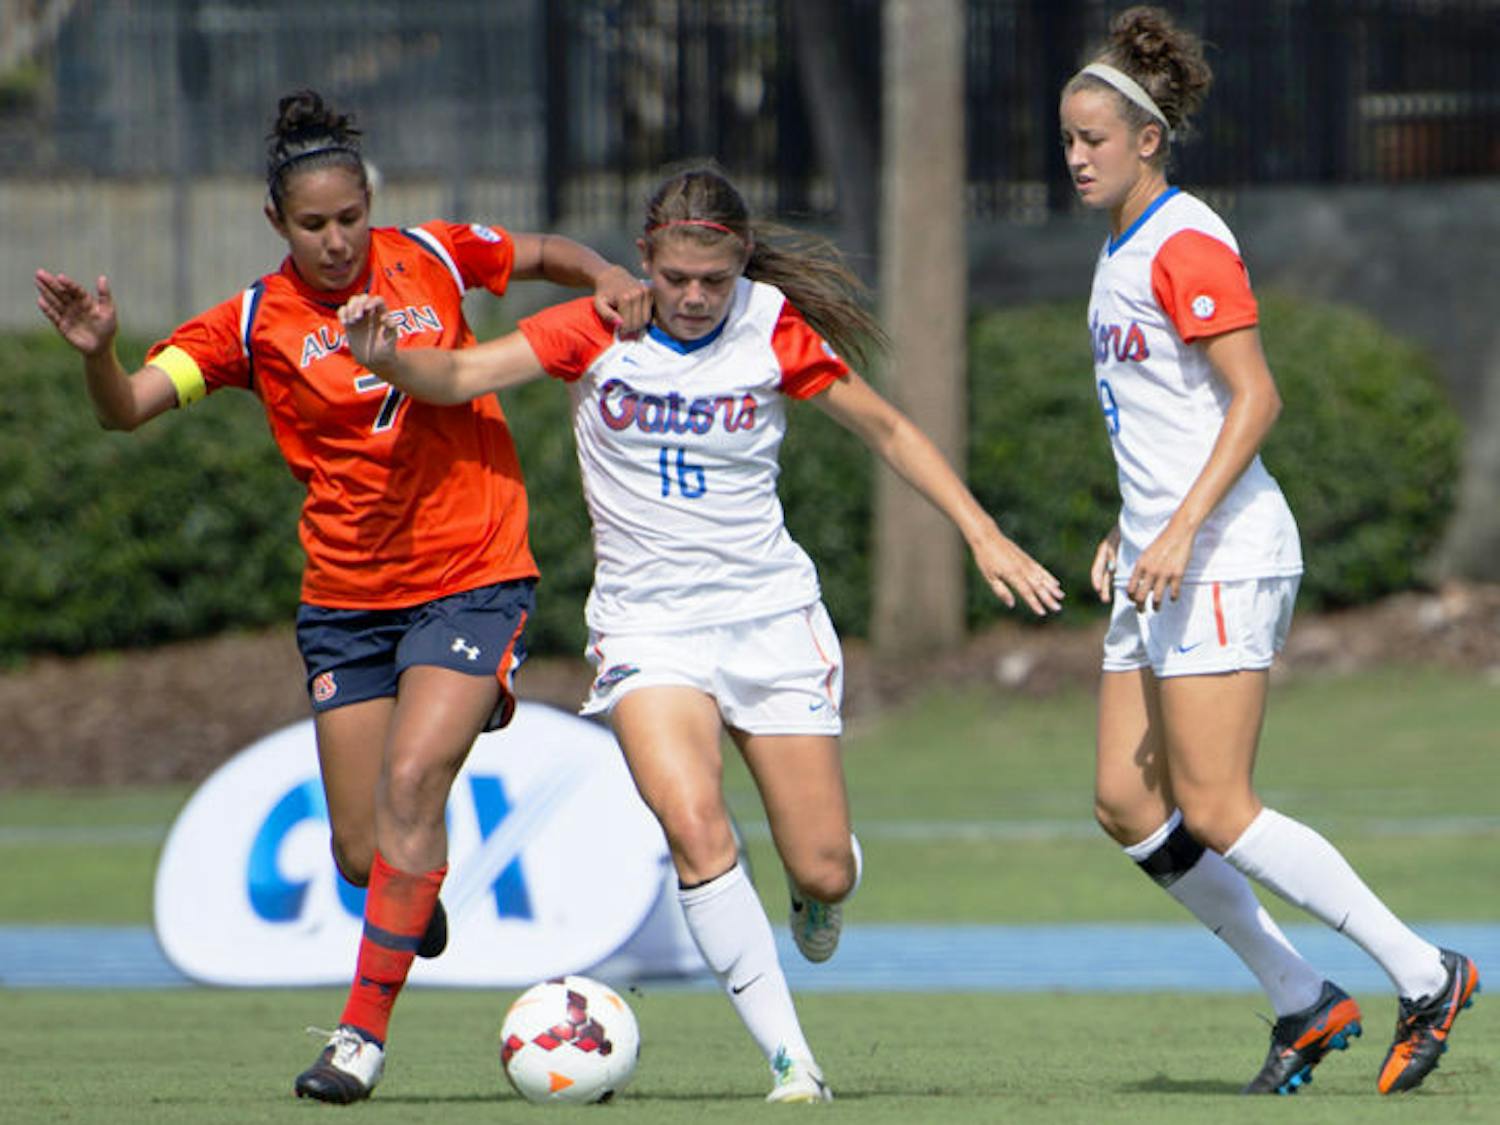 Liz Slattery battles for the ball during Florida’s 3-0 victory against Auburn on Sunday in James G. Pressly Stadium. Slattery recorded her first career assist against the Tigers.